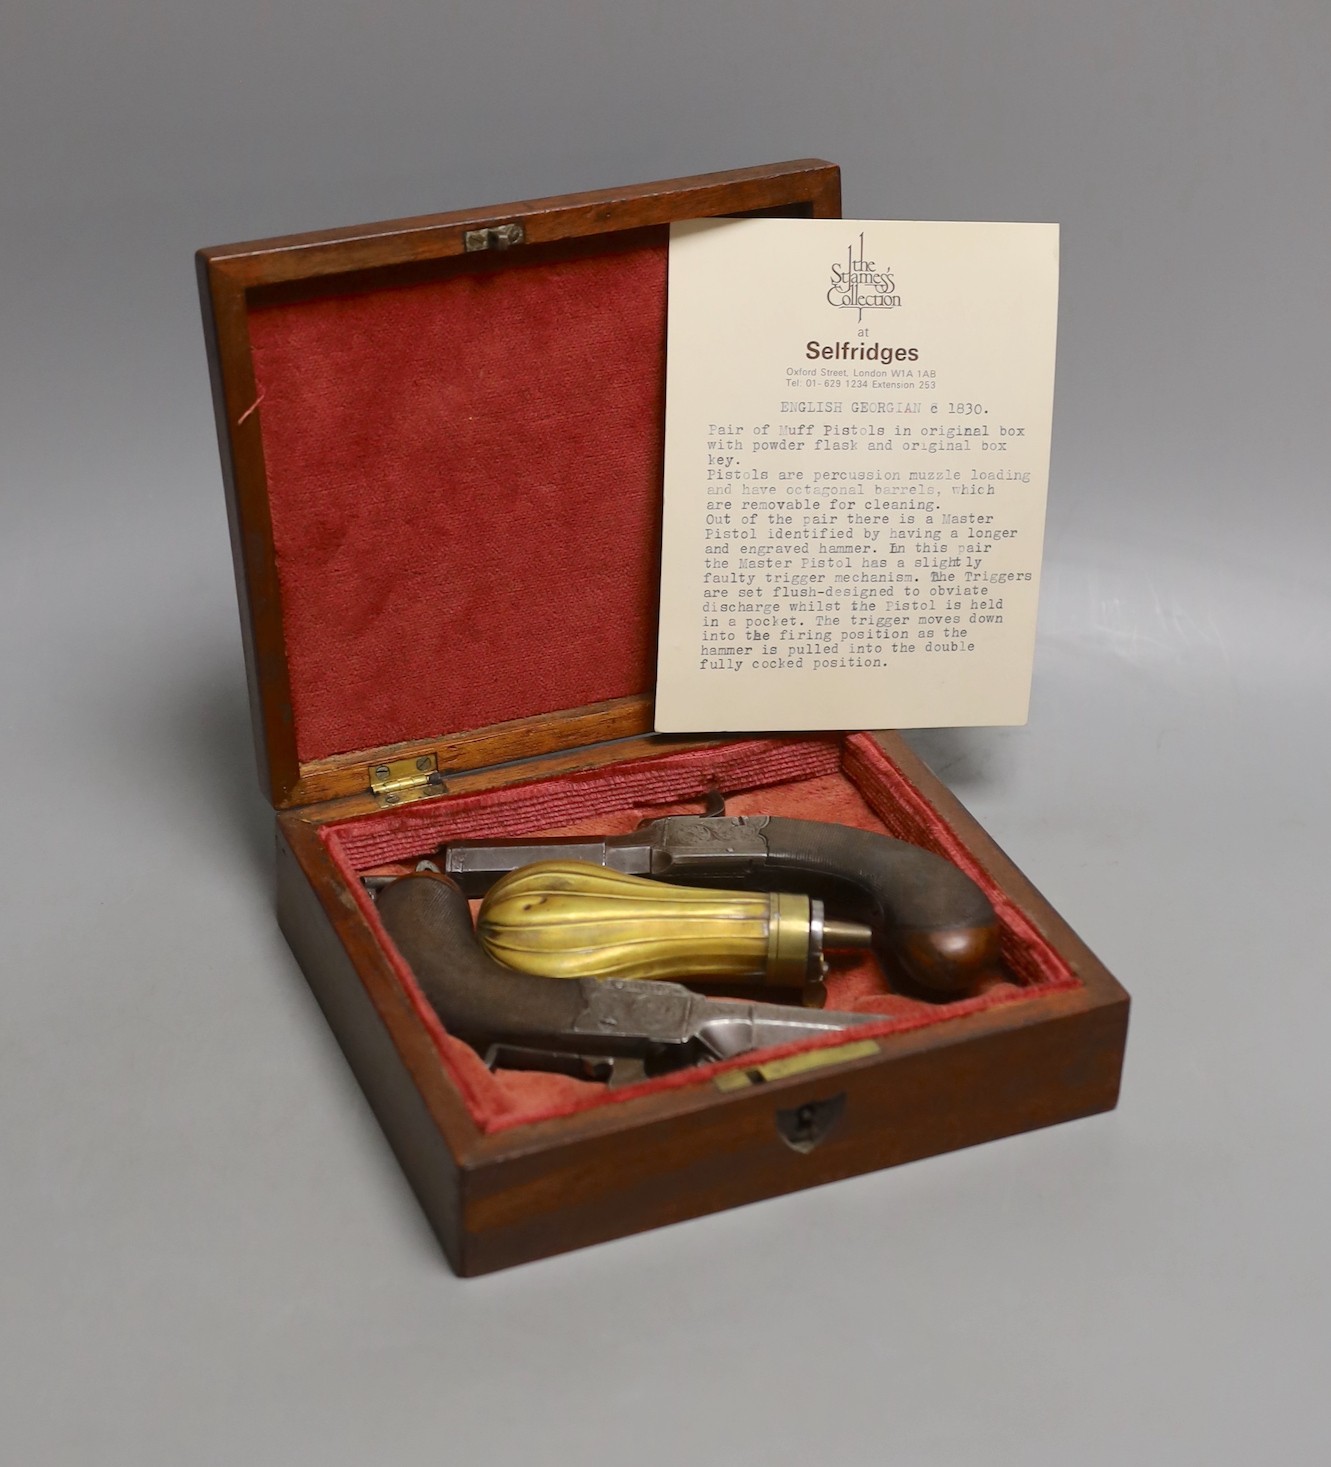 A pair of muff pistols and powder flask, original fitted mahogany case and key, circa 1830